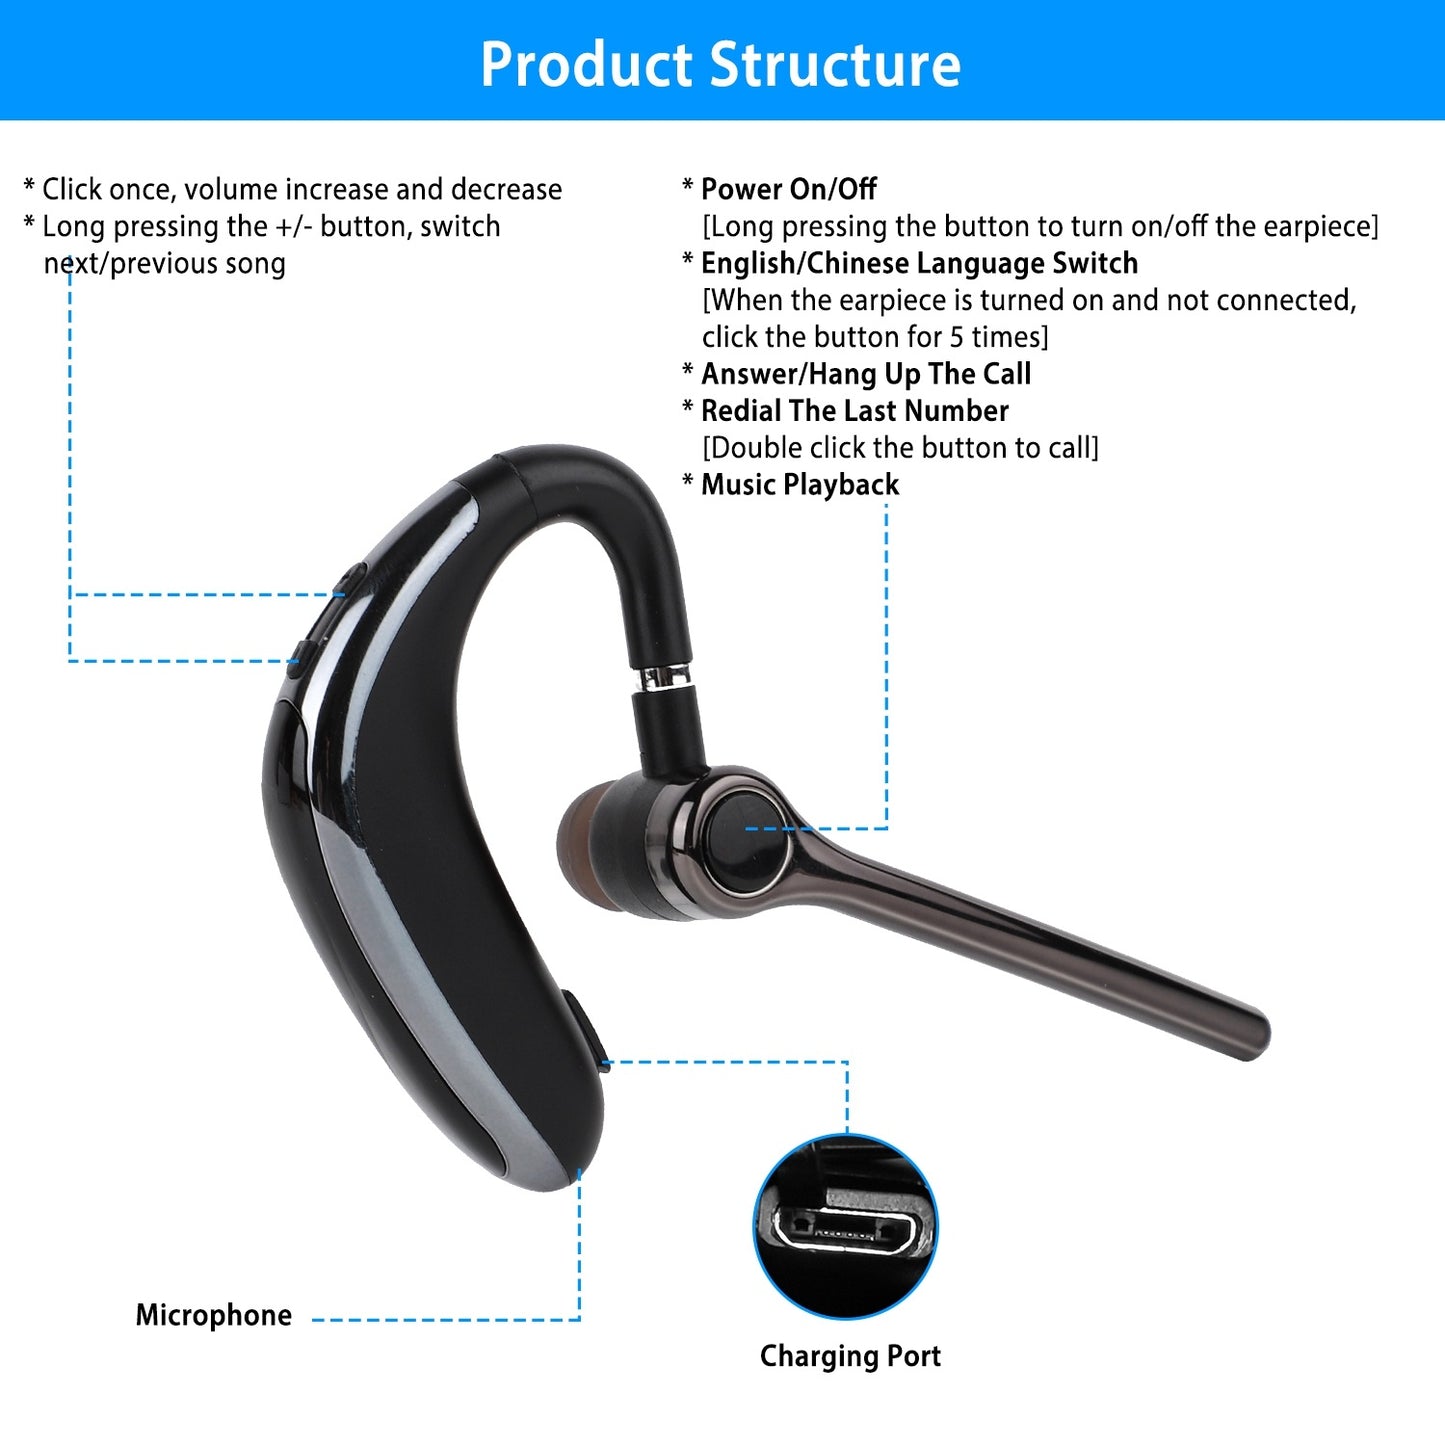 Wireless V5.0 Earpiece ENC Driving Earbuds 180° Rotatable Left Right Ear Fit Earphone For Business Driving Running